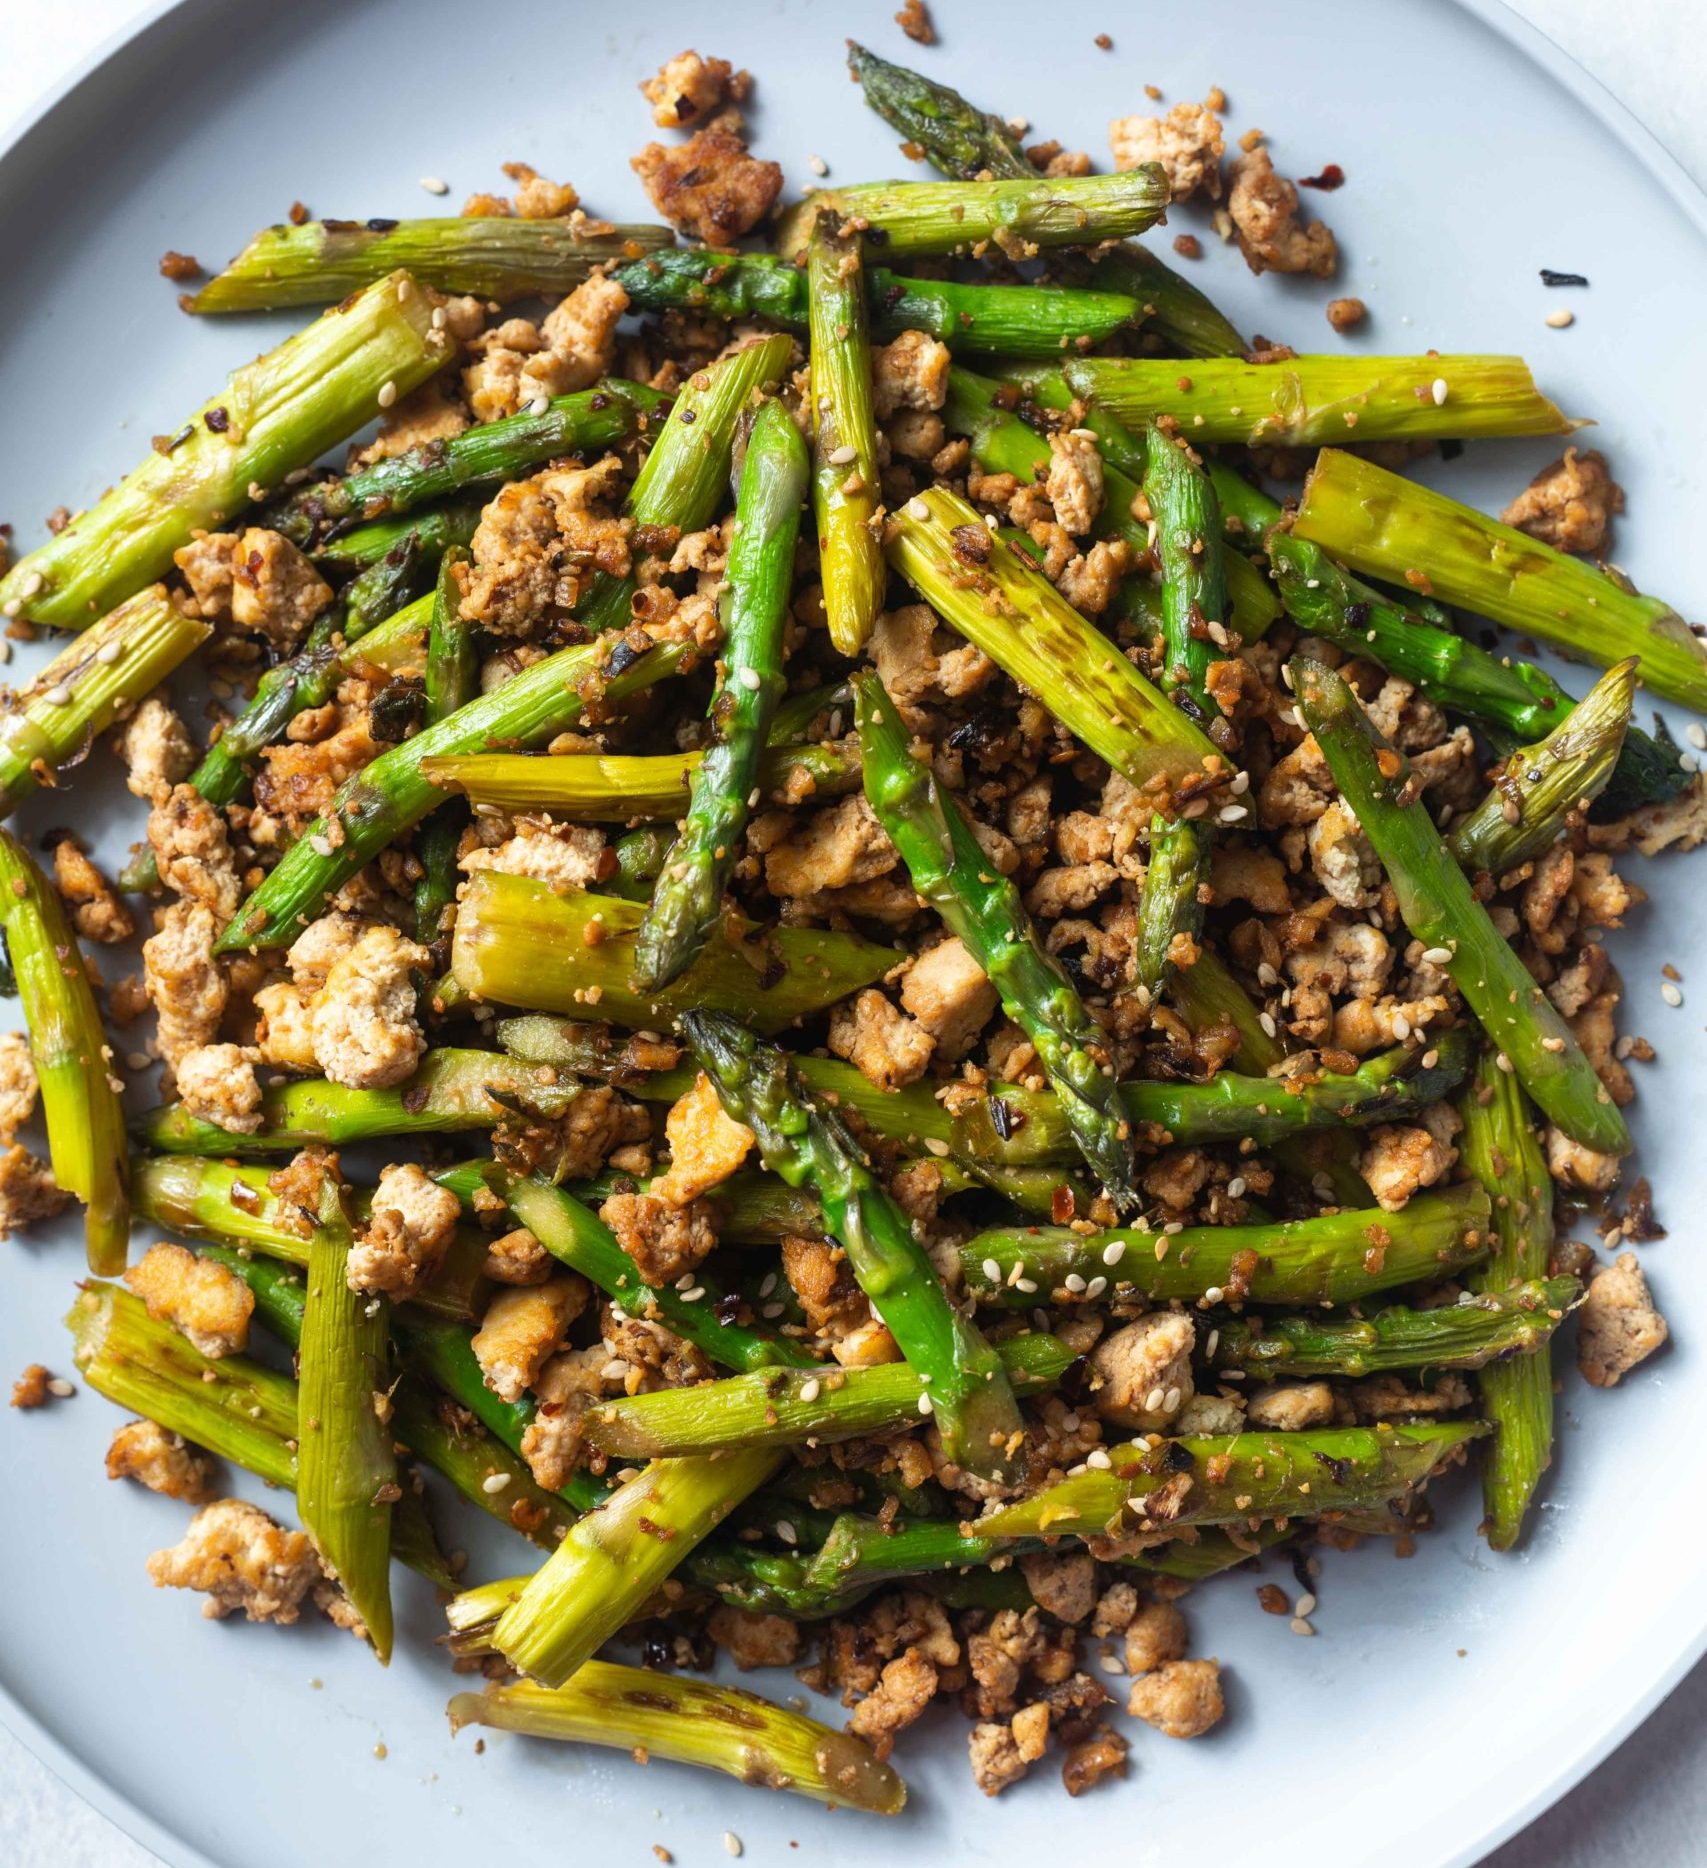 Tofu and Asparagus Stir - Fry - Chili in a pod